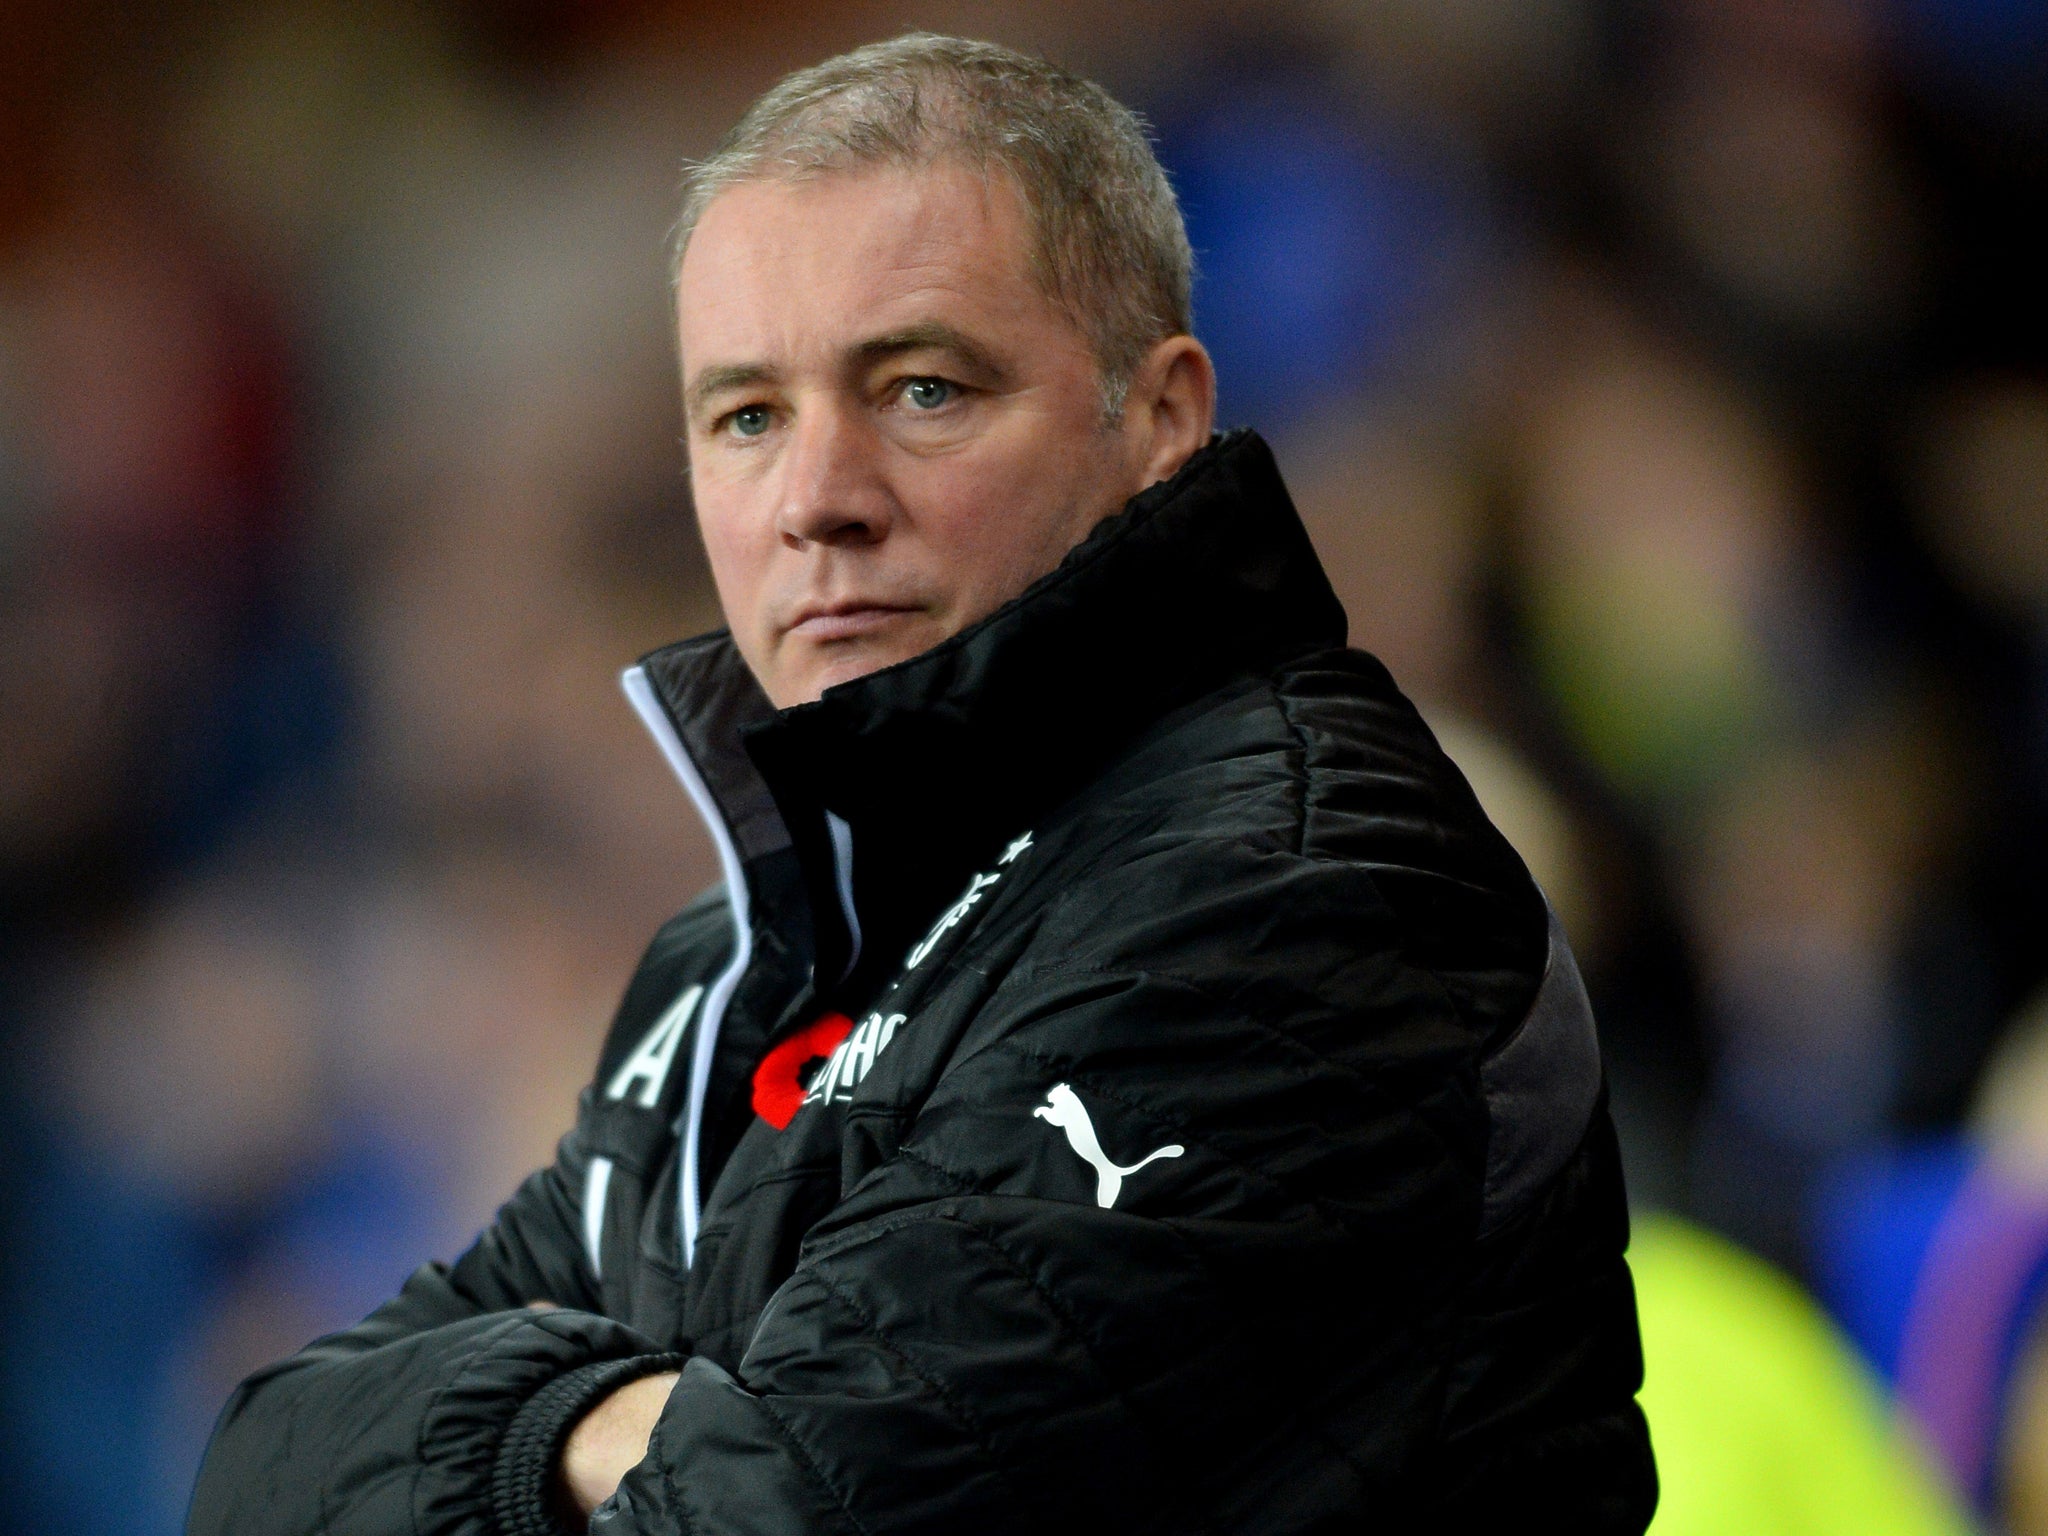 Rangers manager Ally McCoist has paid tribute to his former teammate Ian Redford